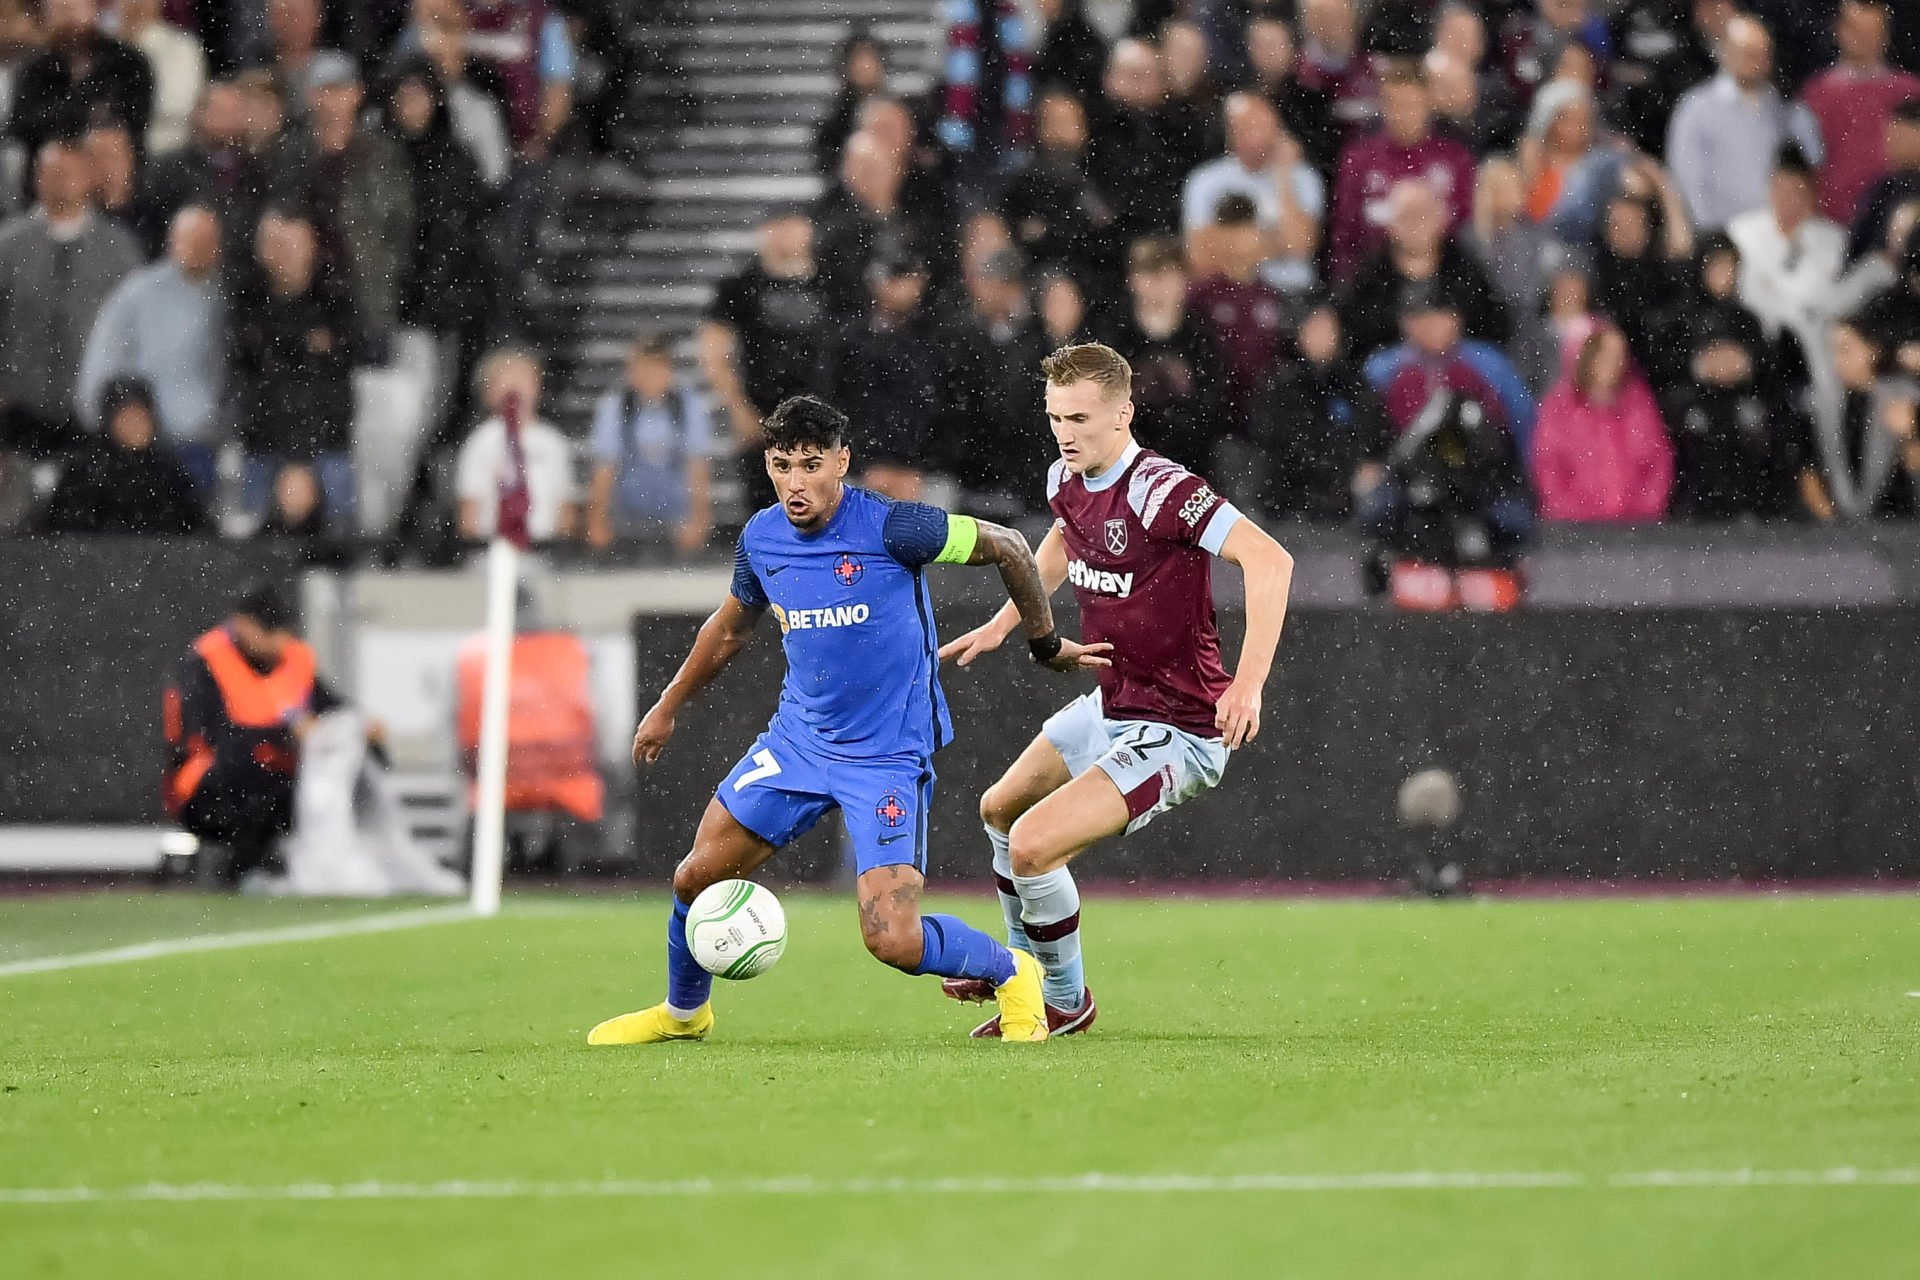 Flynn Downes was brilliant for West Ham United tonight in the UEFA Europa Conference League clash with FCSB